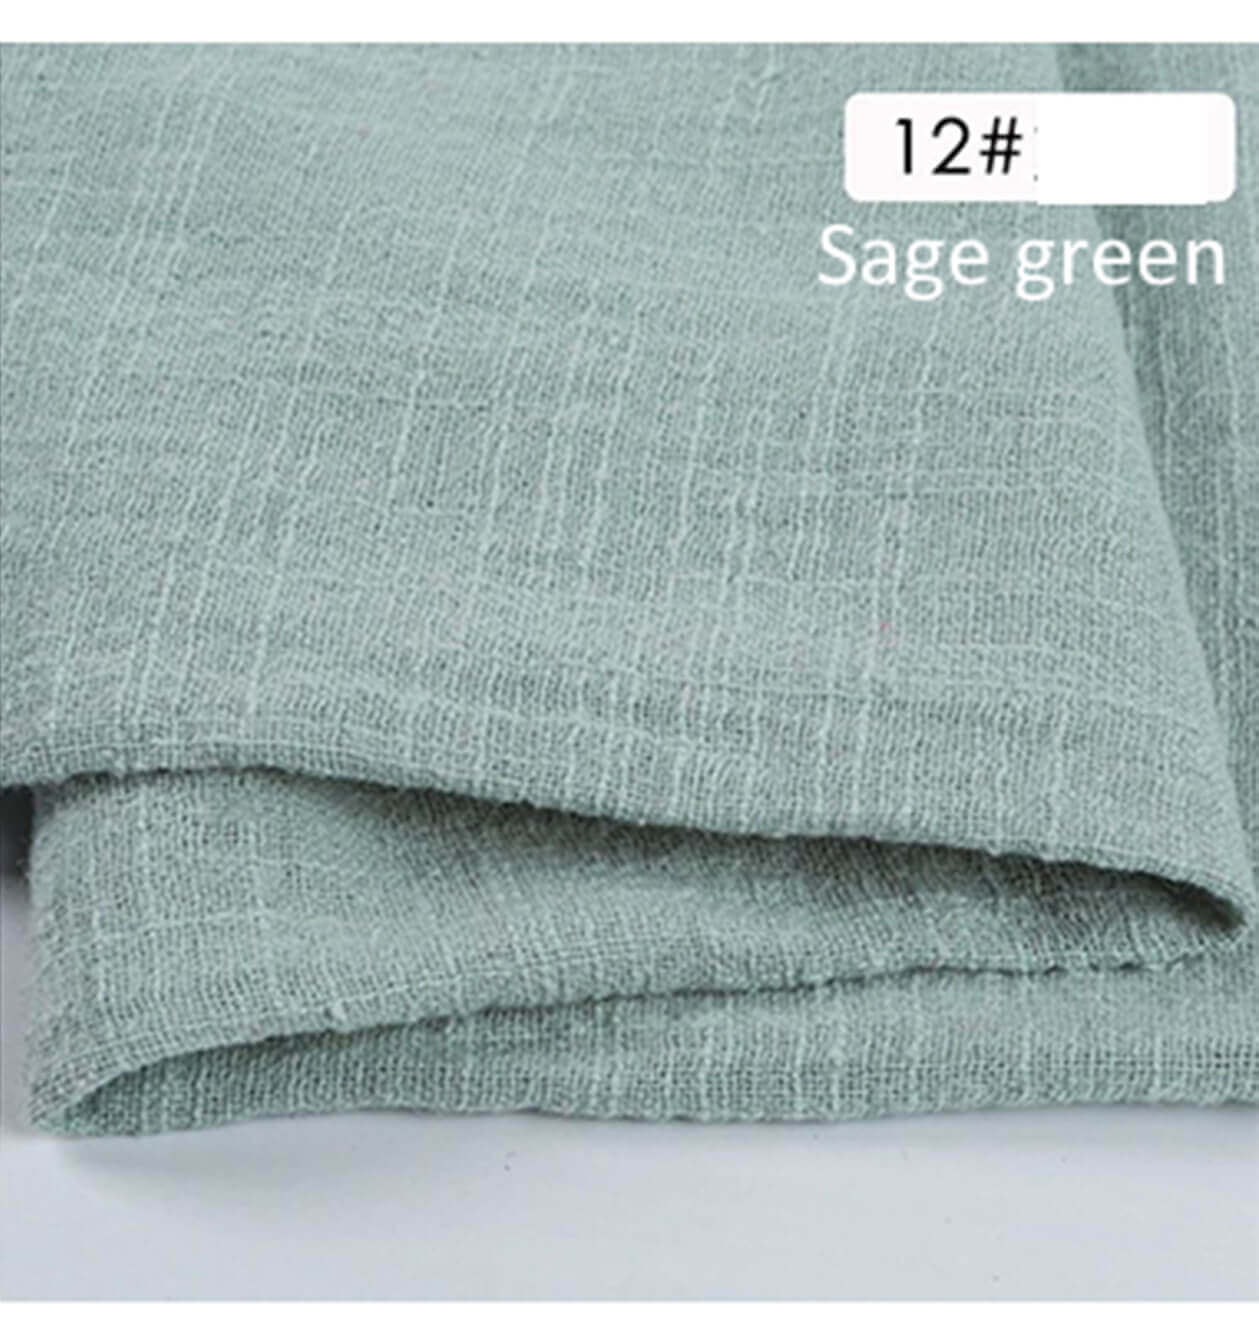 Sastybale table runners wedding decorations sage green